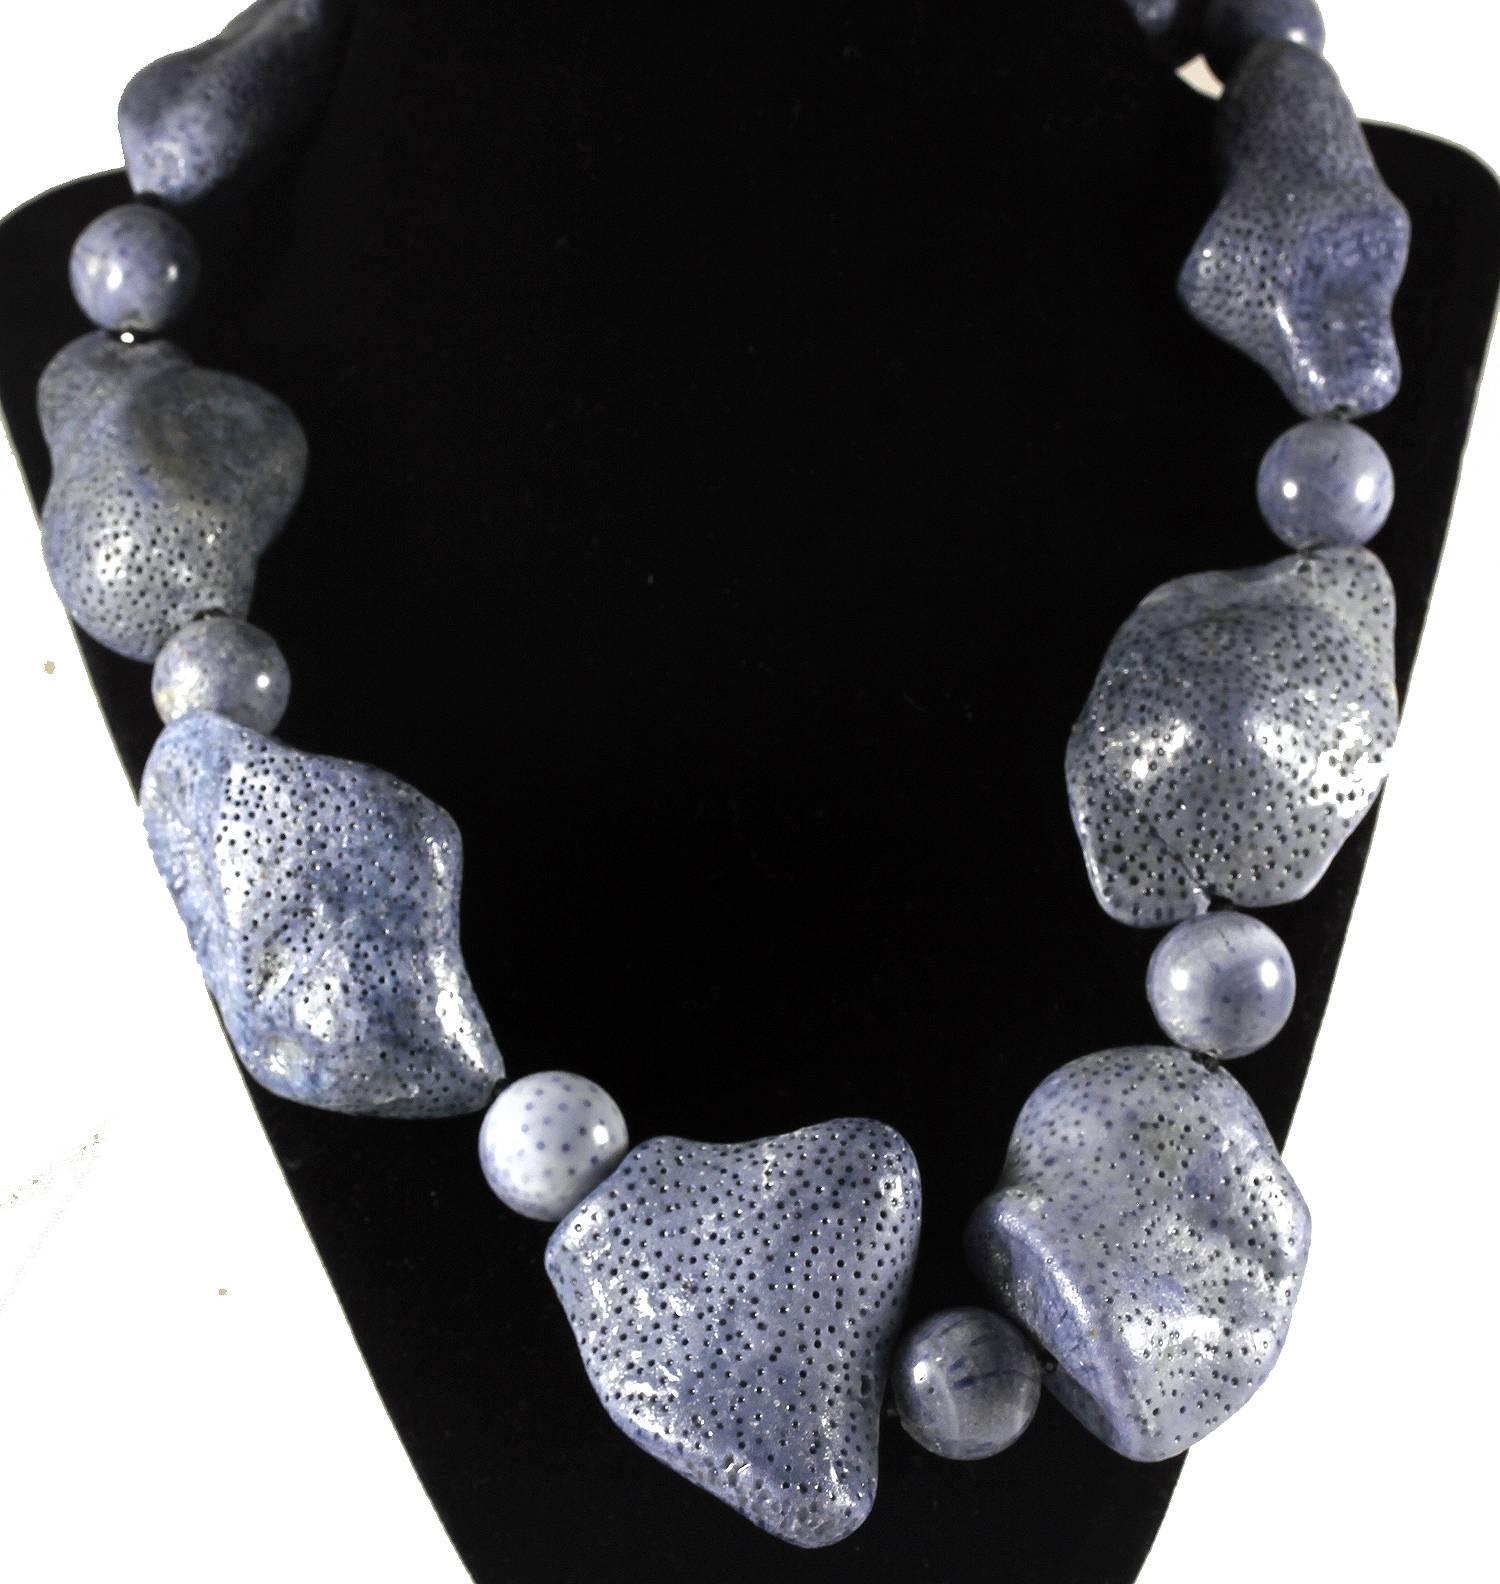 Large polished uneven chunks of natural Blue Coral with tiny sparkly black Spinel accents.
Size:  largest piece 46 mm x 39 mm
Length:  21 inches
Clasp:  Sterling Silver inlaid with tiny diamonds